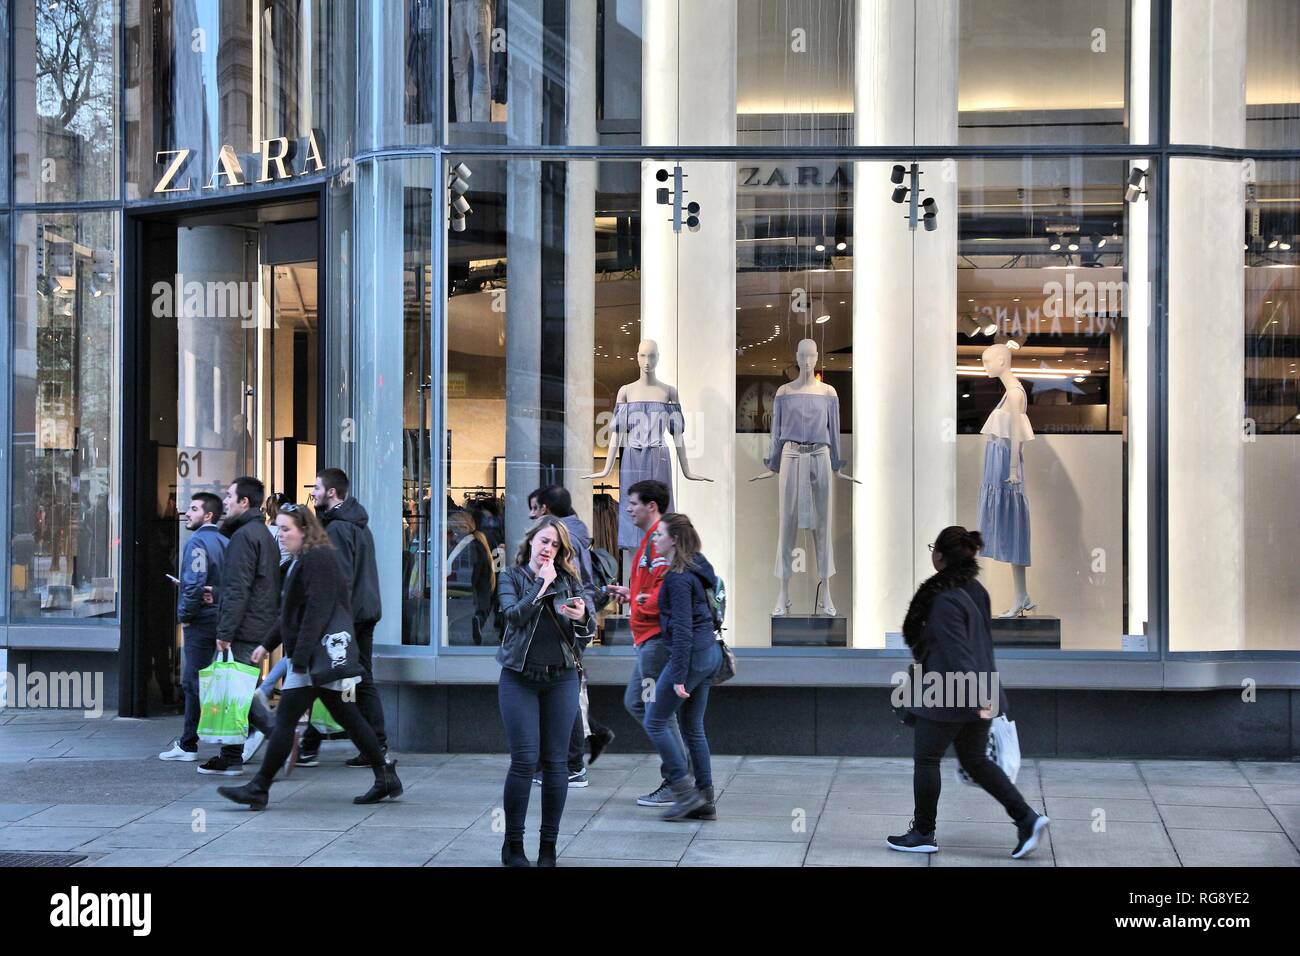 LONDON, UK - APRIL 23, 2016: People shop at Zara, Oxford Street in London. Oxford  Street has approximately half a million daily visitors and 320 store Stock  Photo - Alamy